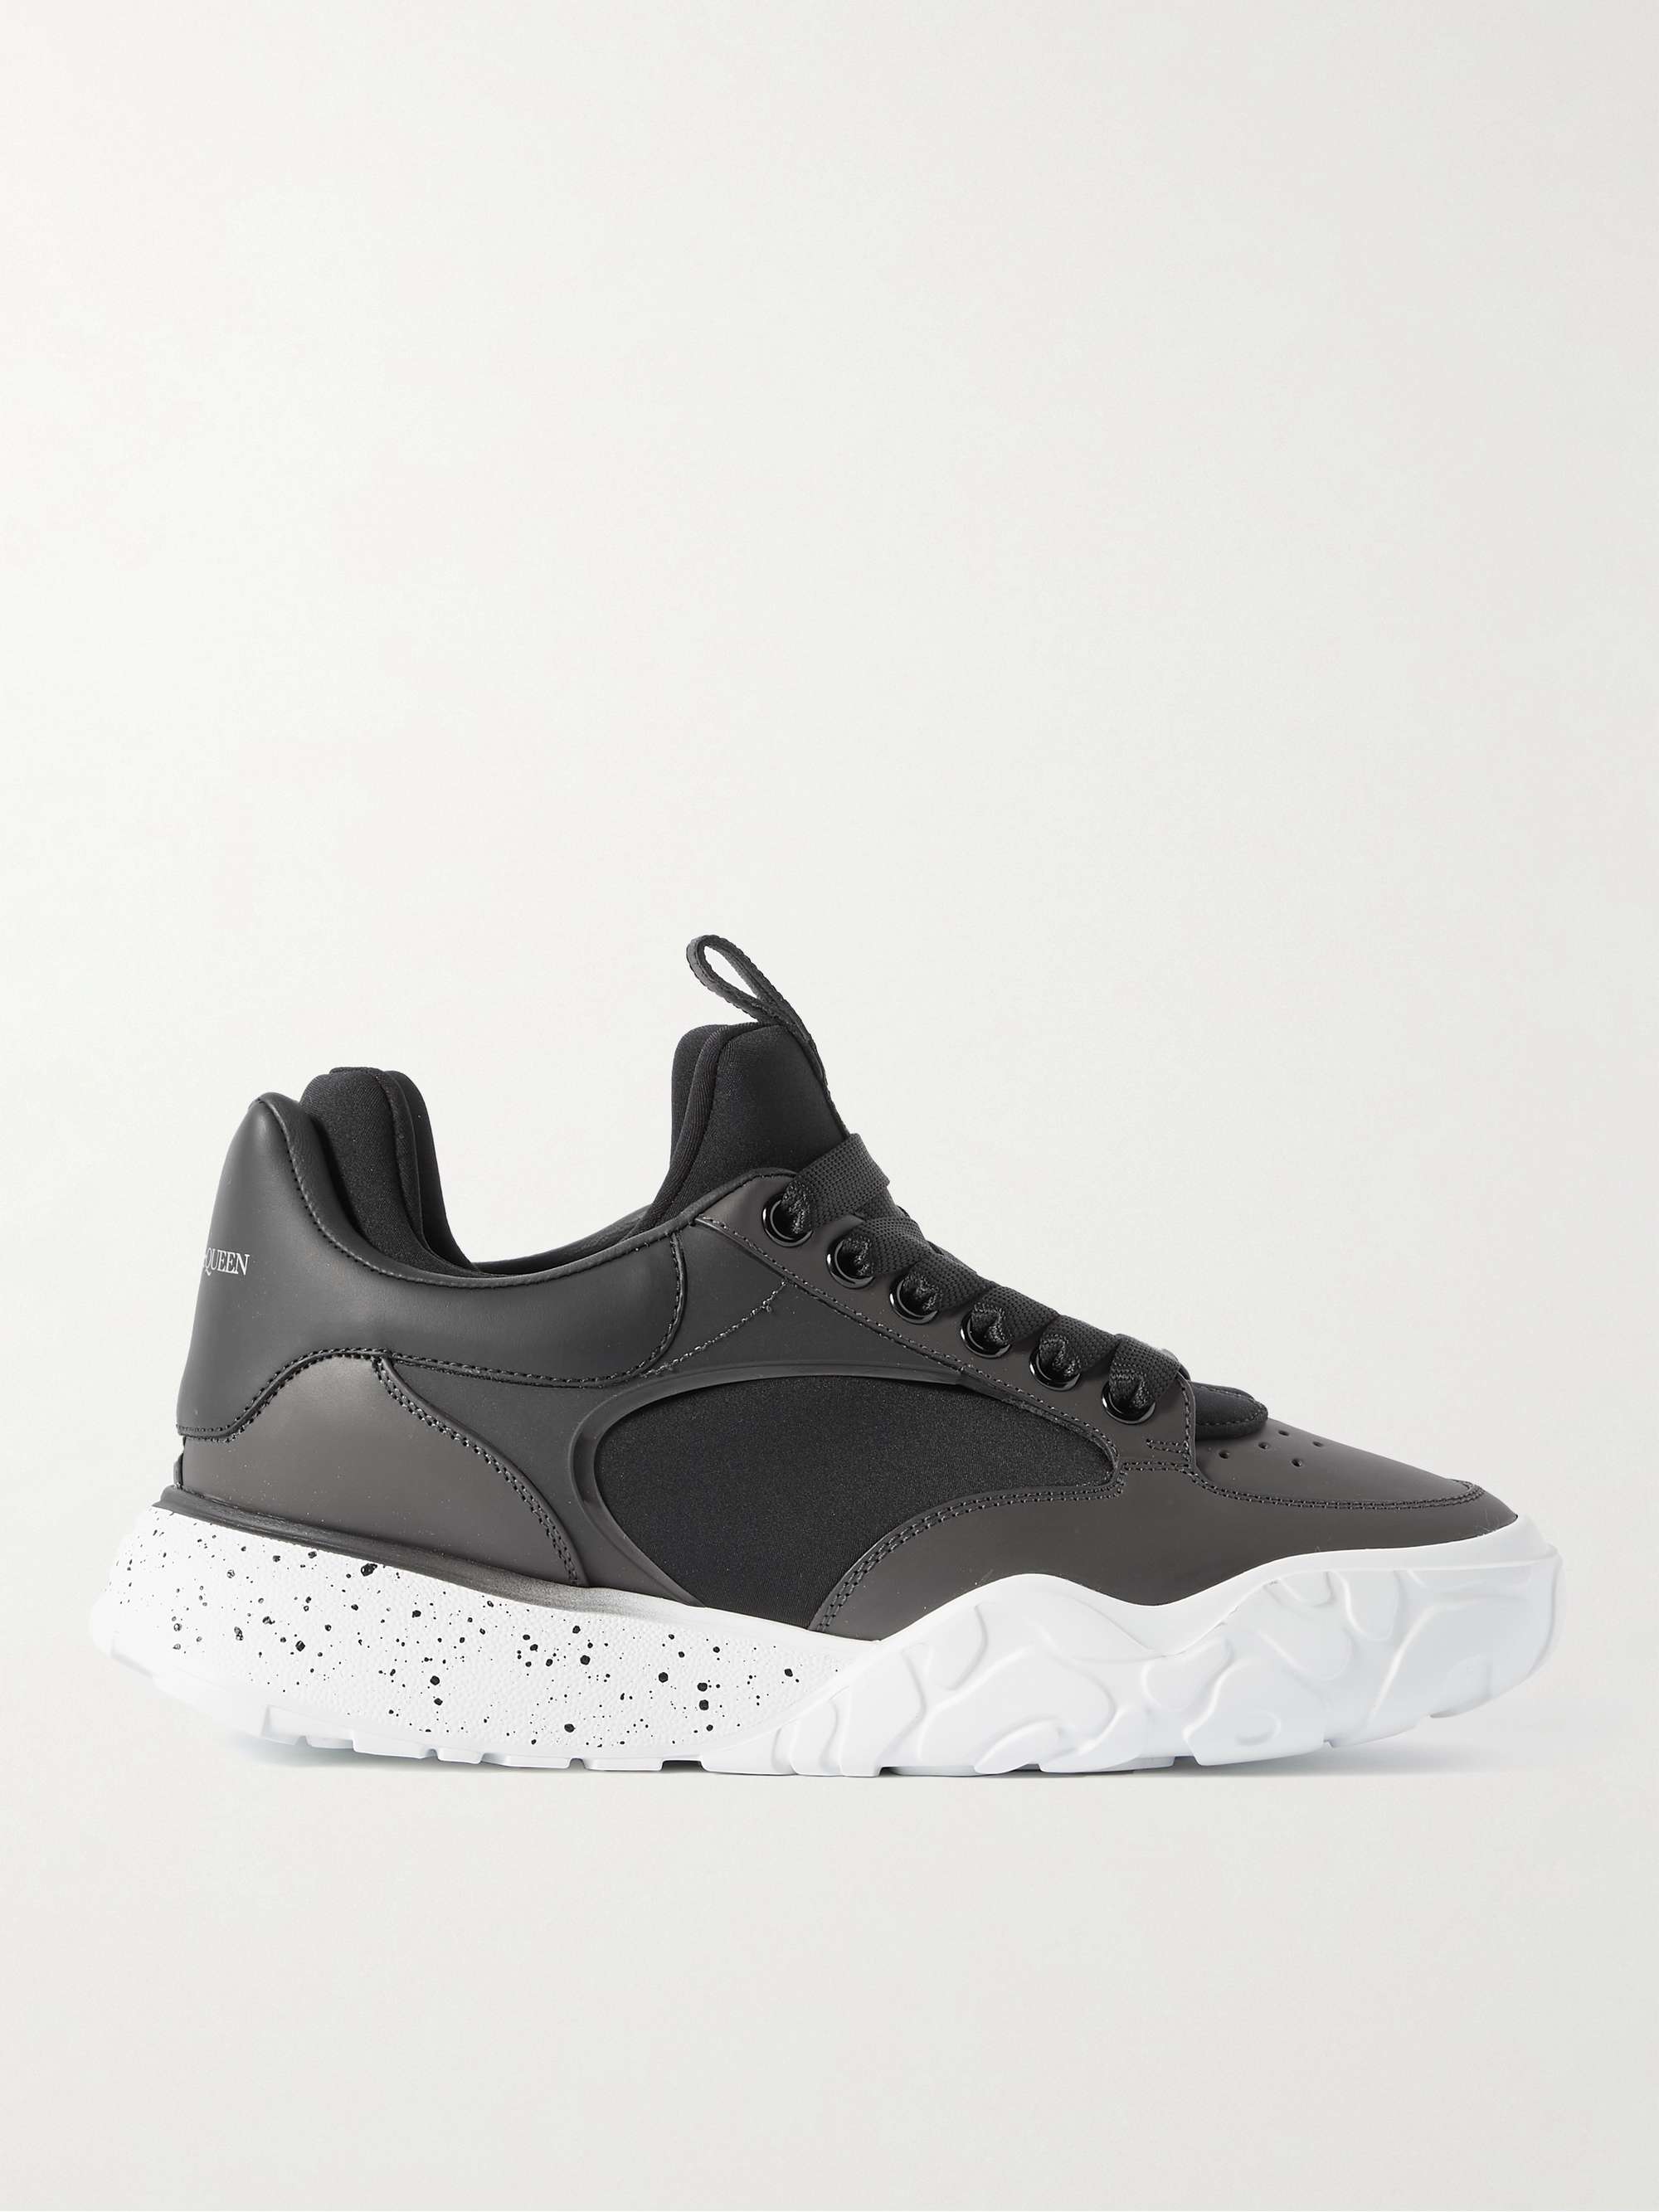 ALEXANDER MCQUEEN Exaggerated-Sole Neoprene and Leather Sneakers | MR PORTER